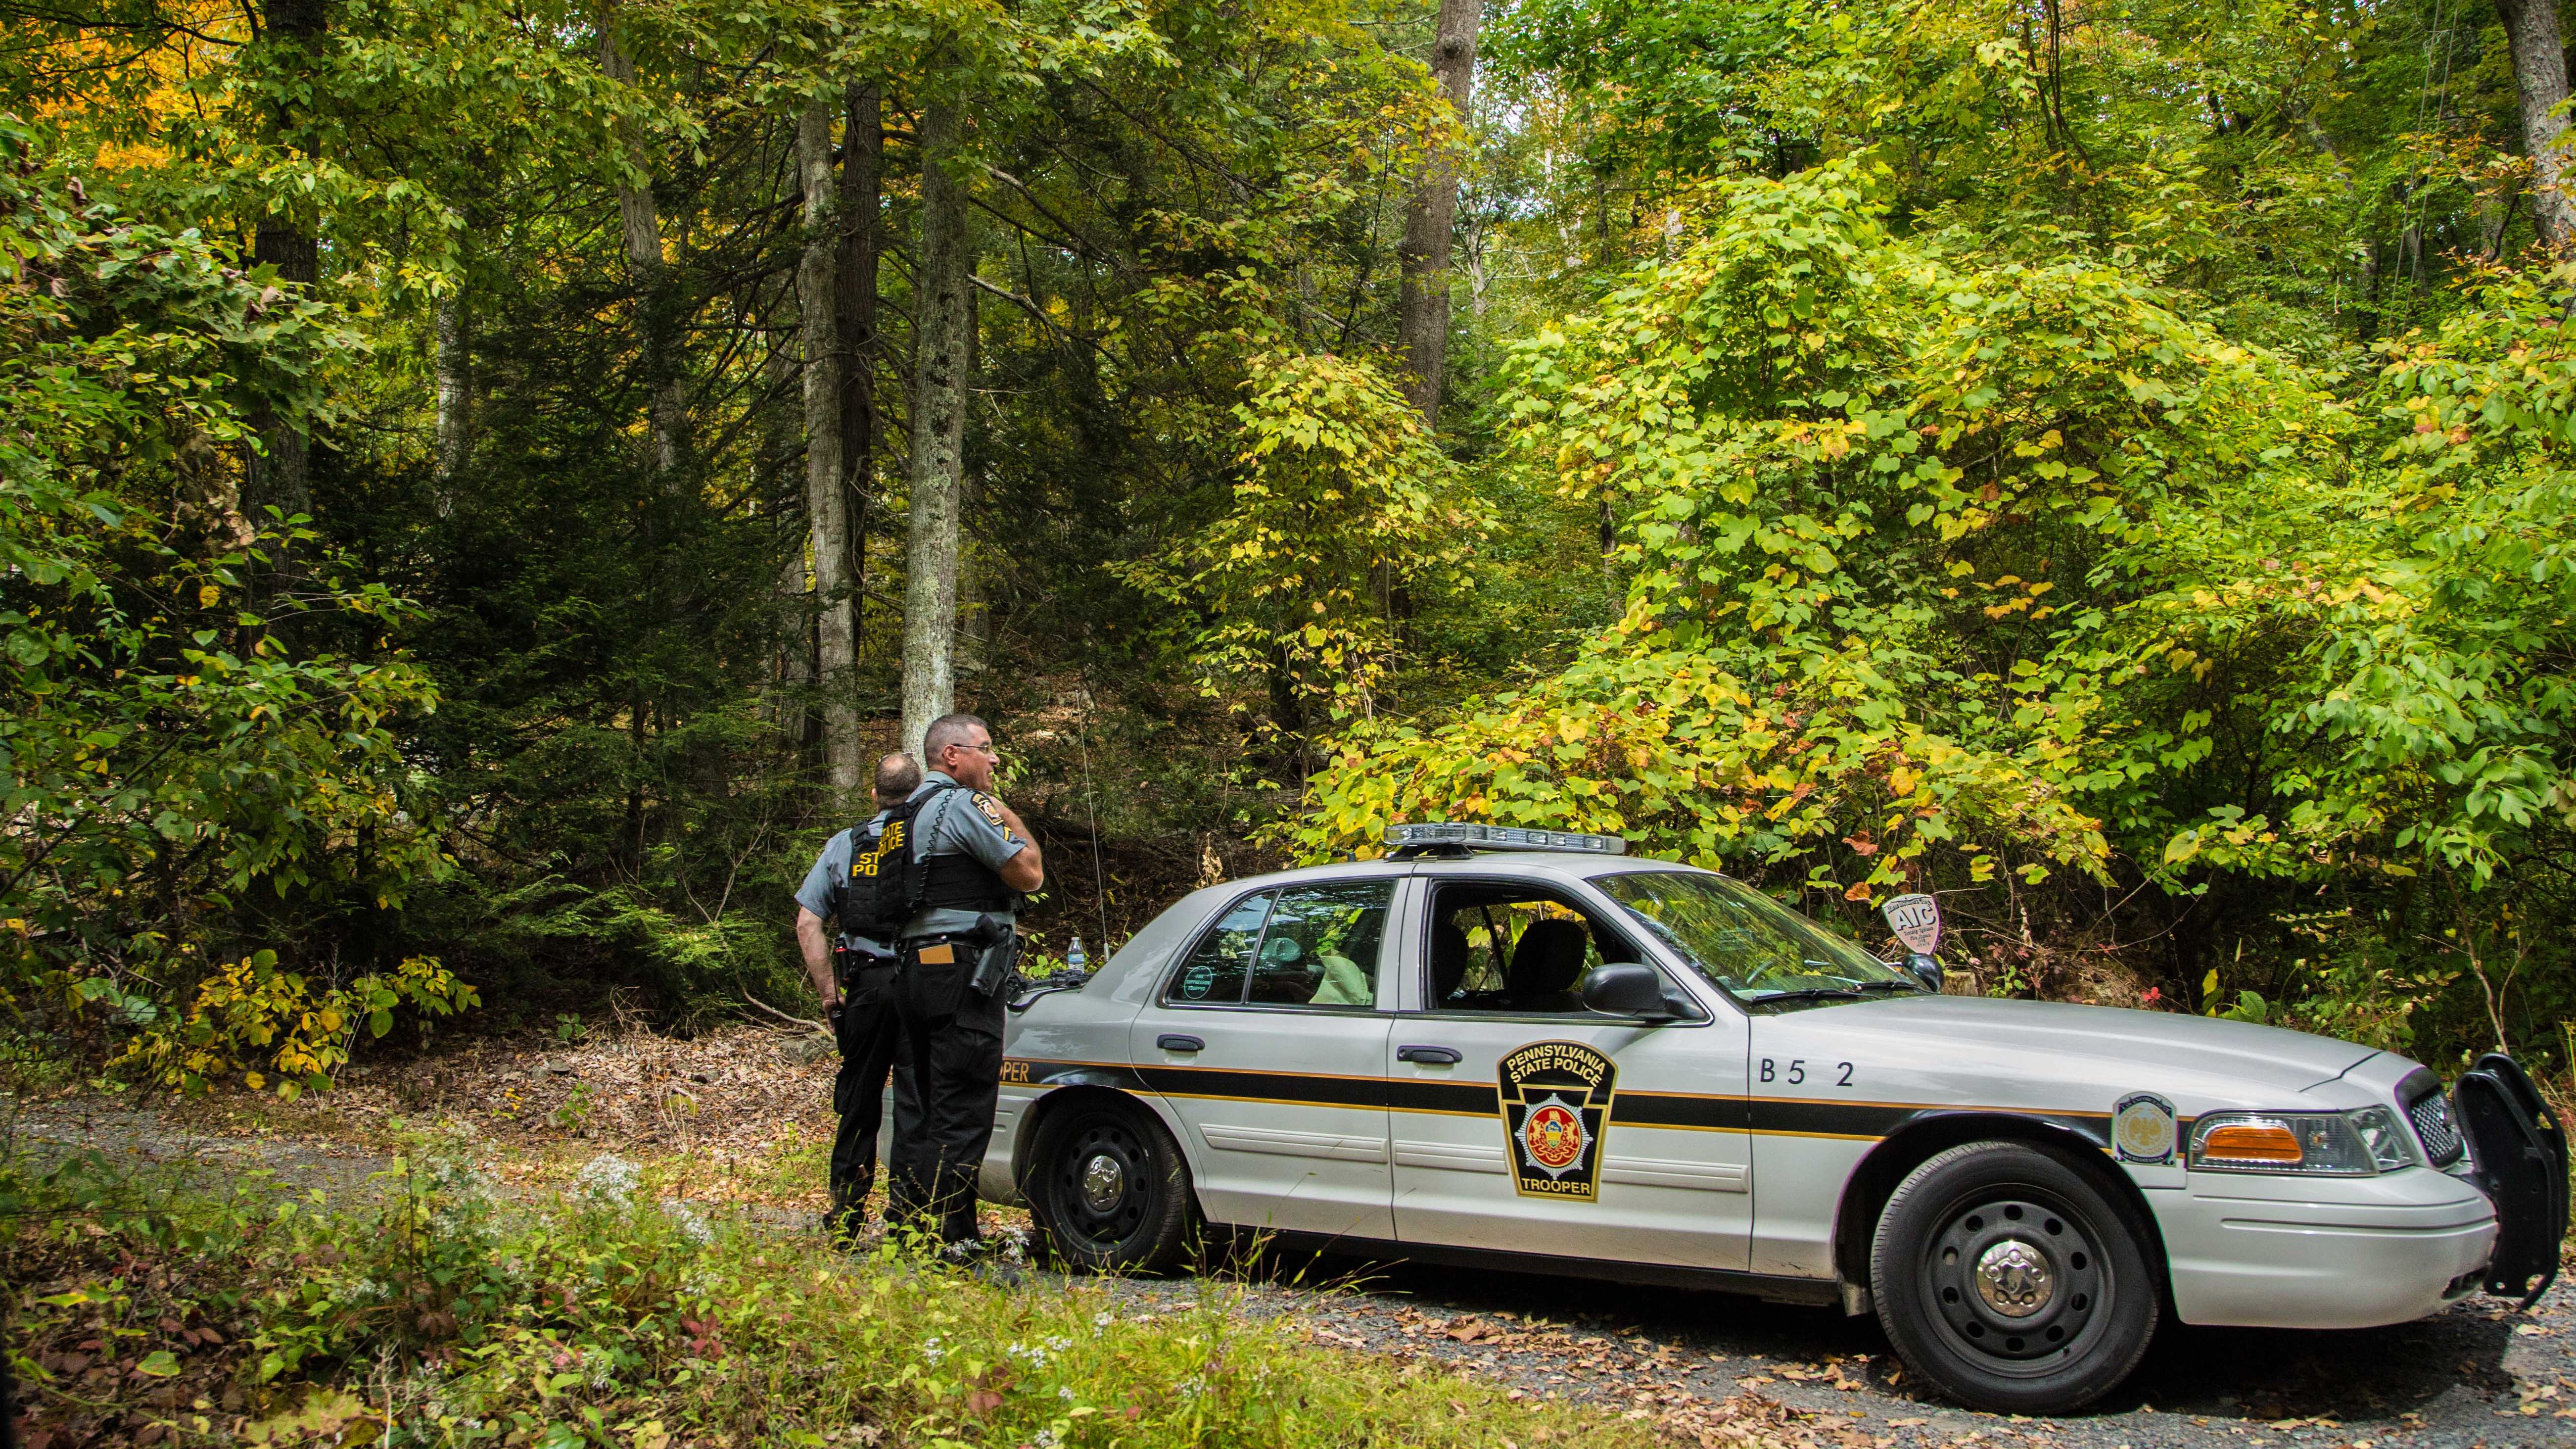 The manhunt for accused murderer Eric Frein continues in Monroe County, Pennsylvania, for second week.
